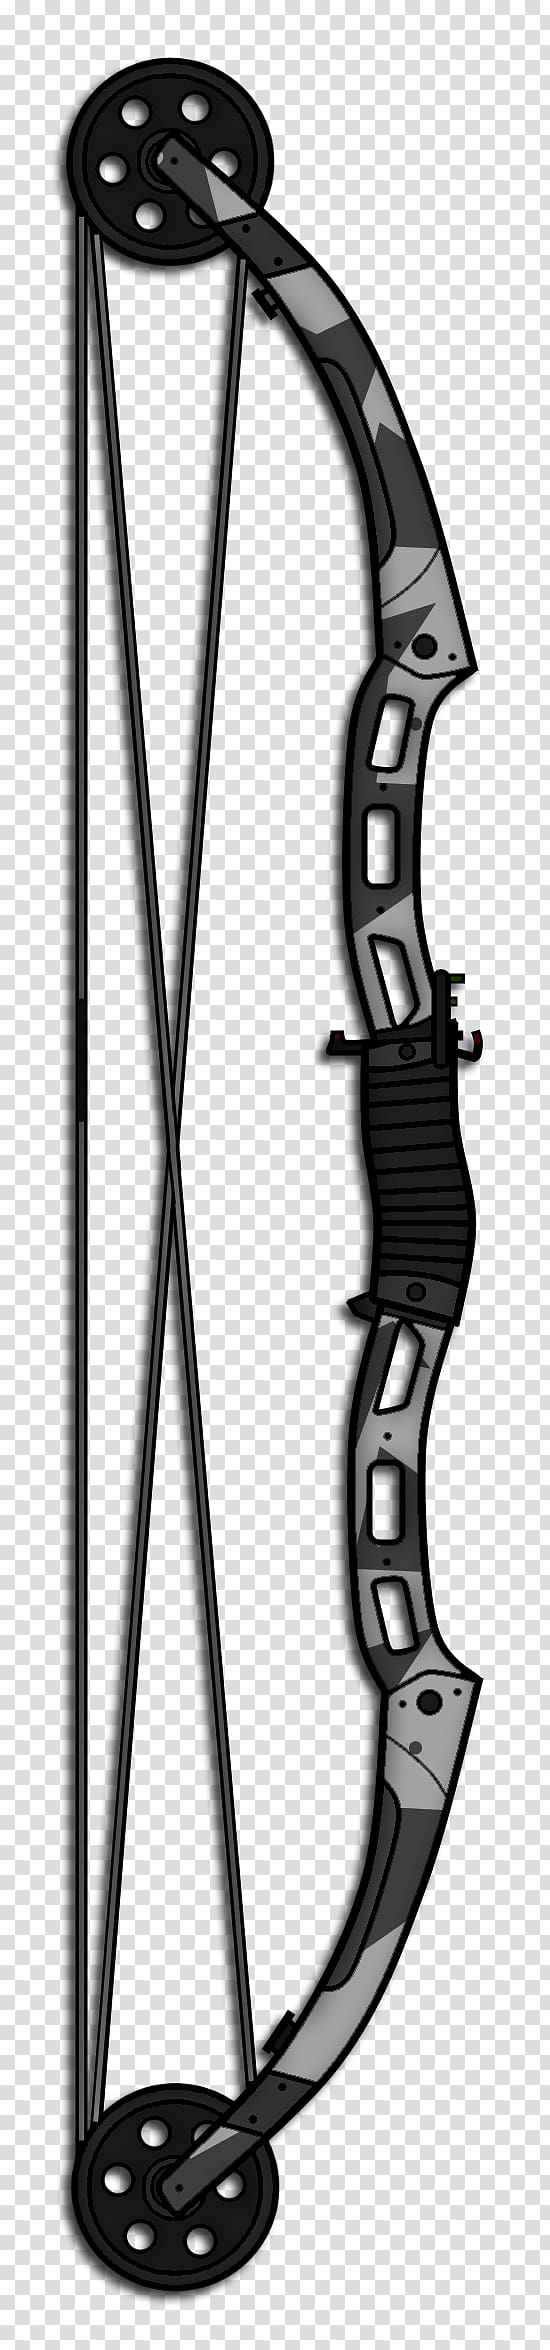 Bow and arrow Compound Bows Archery Recurve bow Longbow, bow transparent background PNG clipart